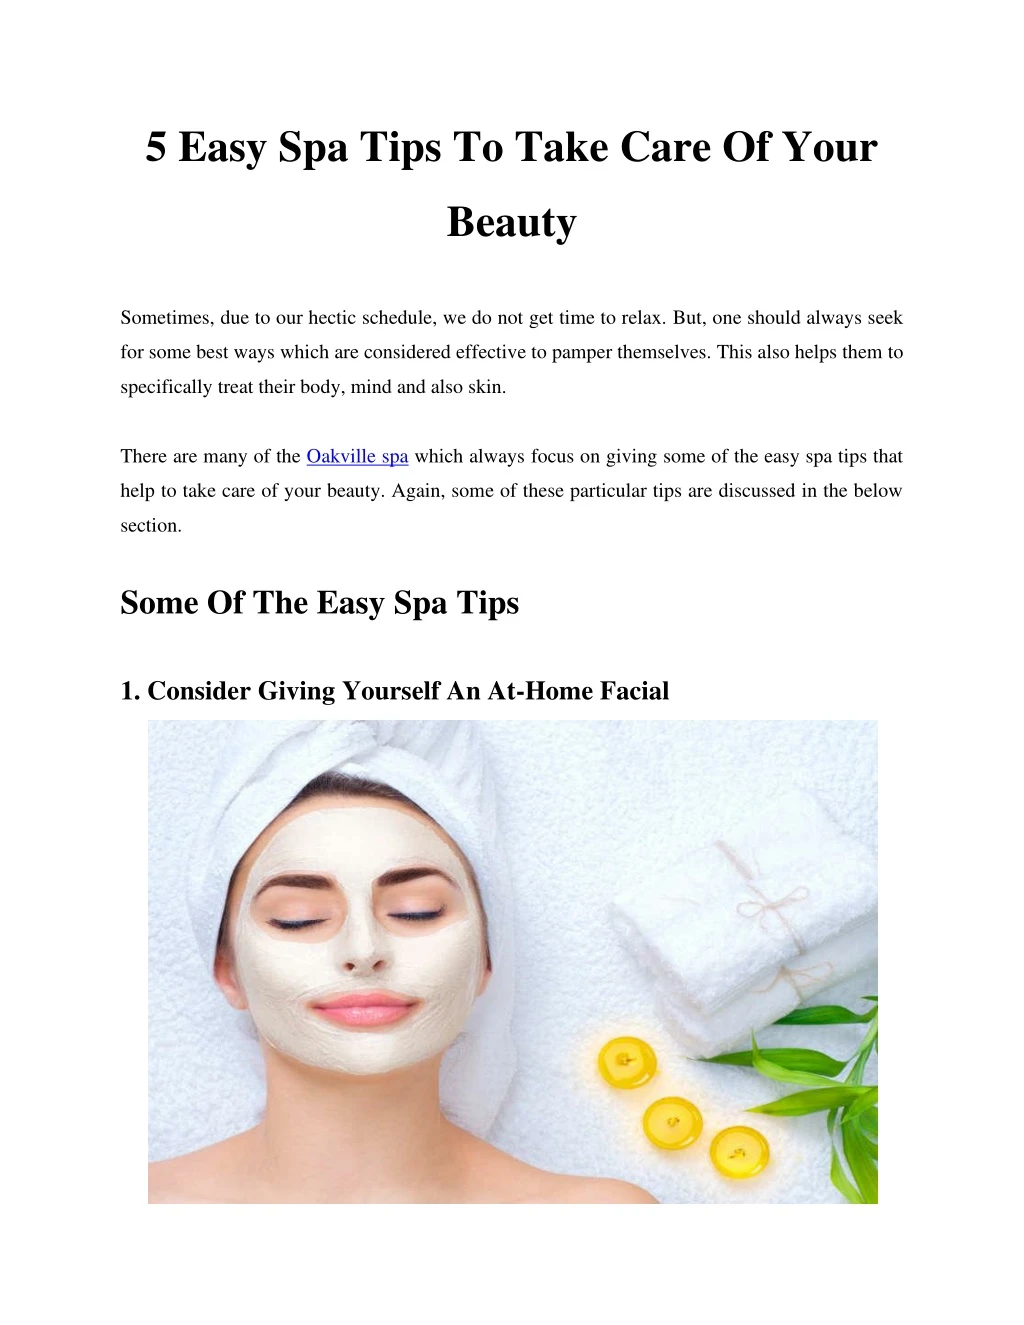 5 easy spa tips to take care of your